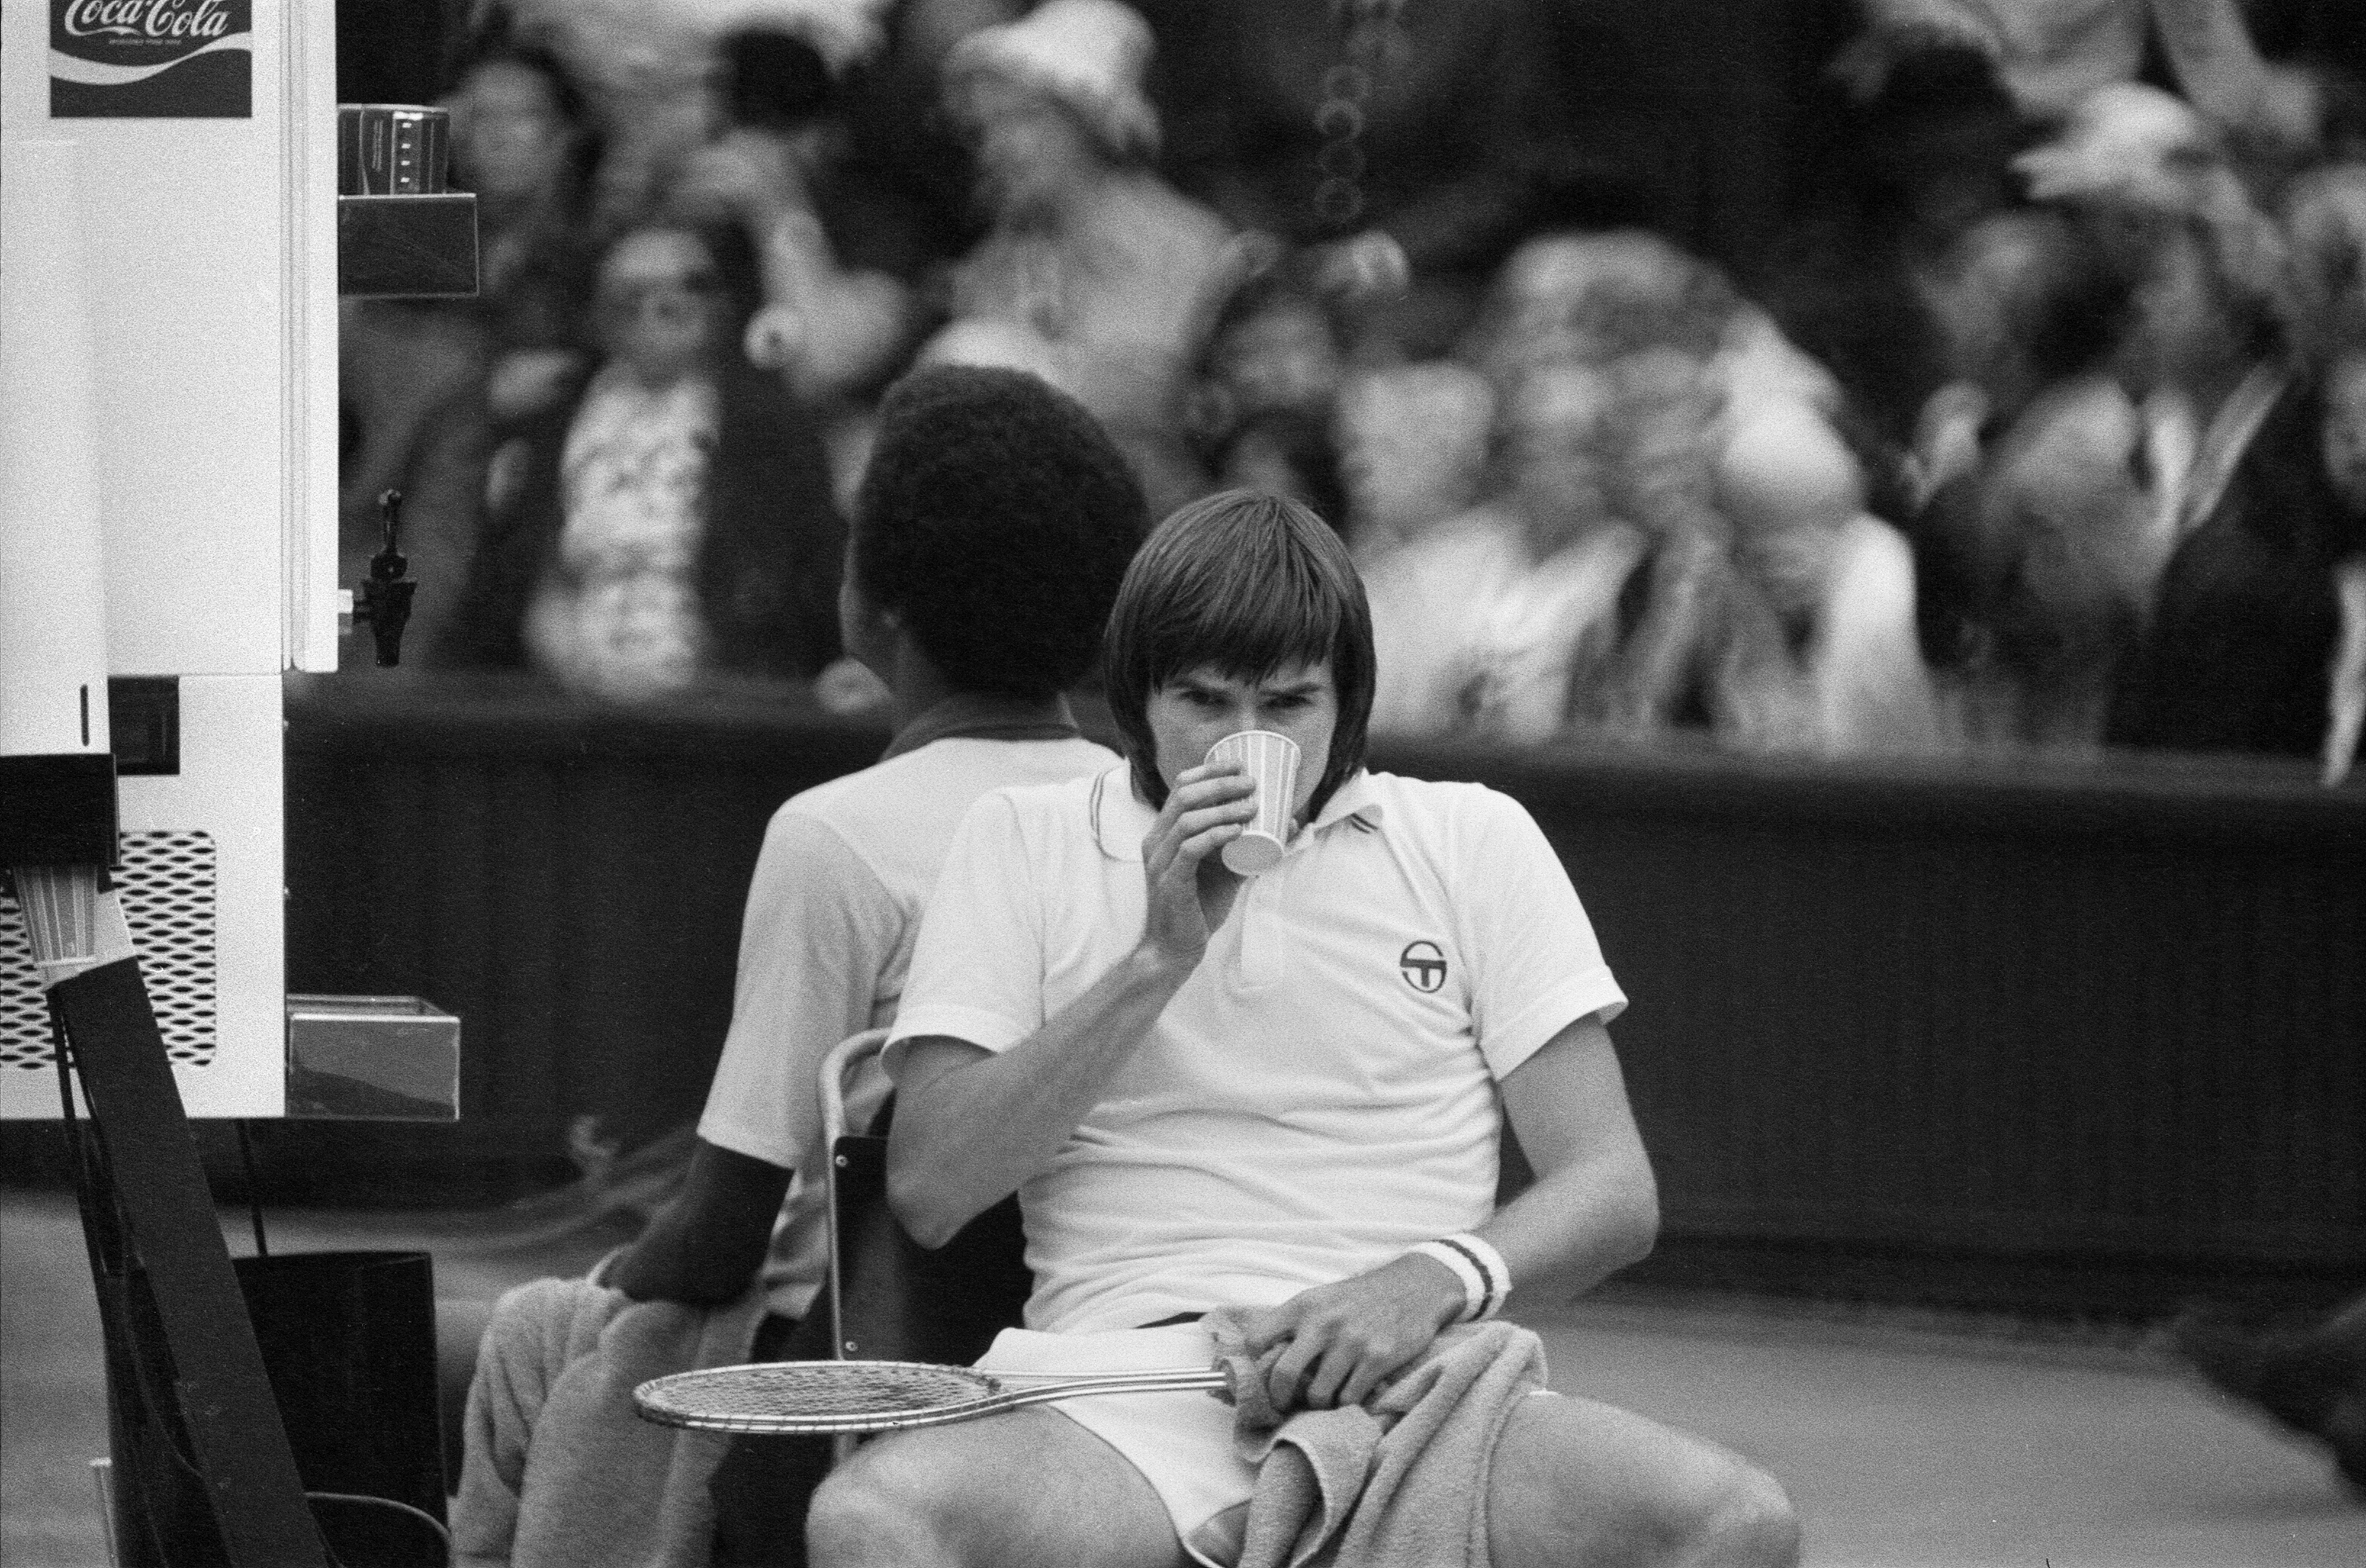 Jimmy Connors and Arthur Ashe in 1975